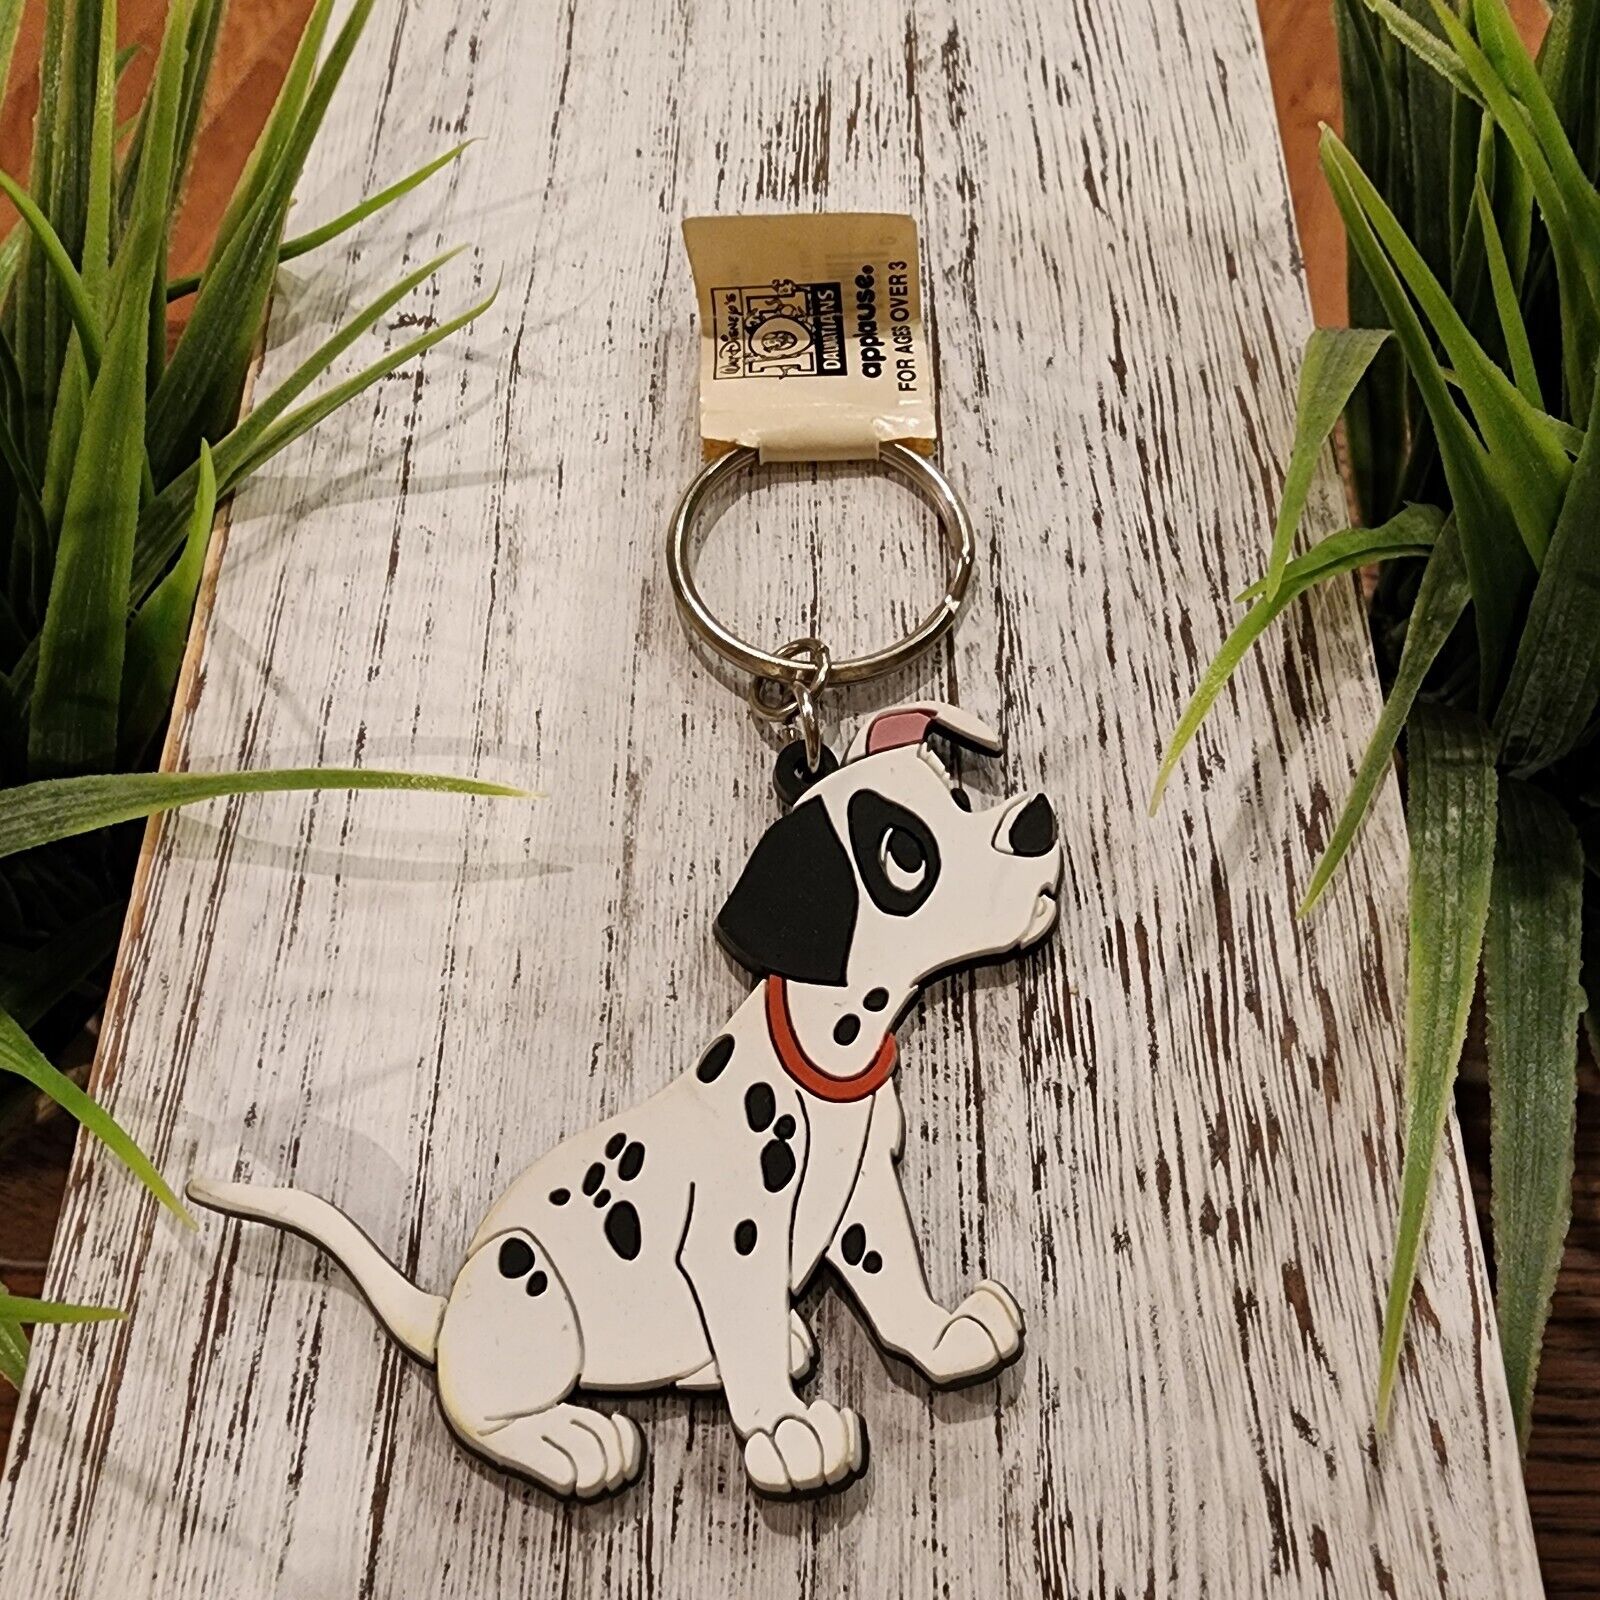 Vintage Disney 101 Dalmations Rubber Key Ring Applause 